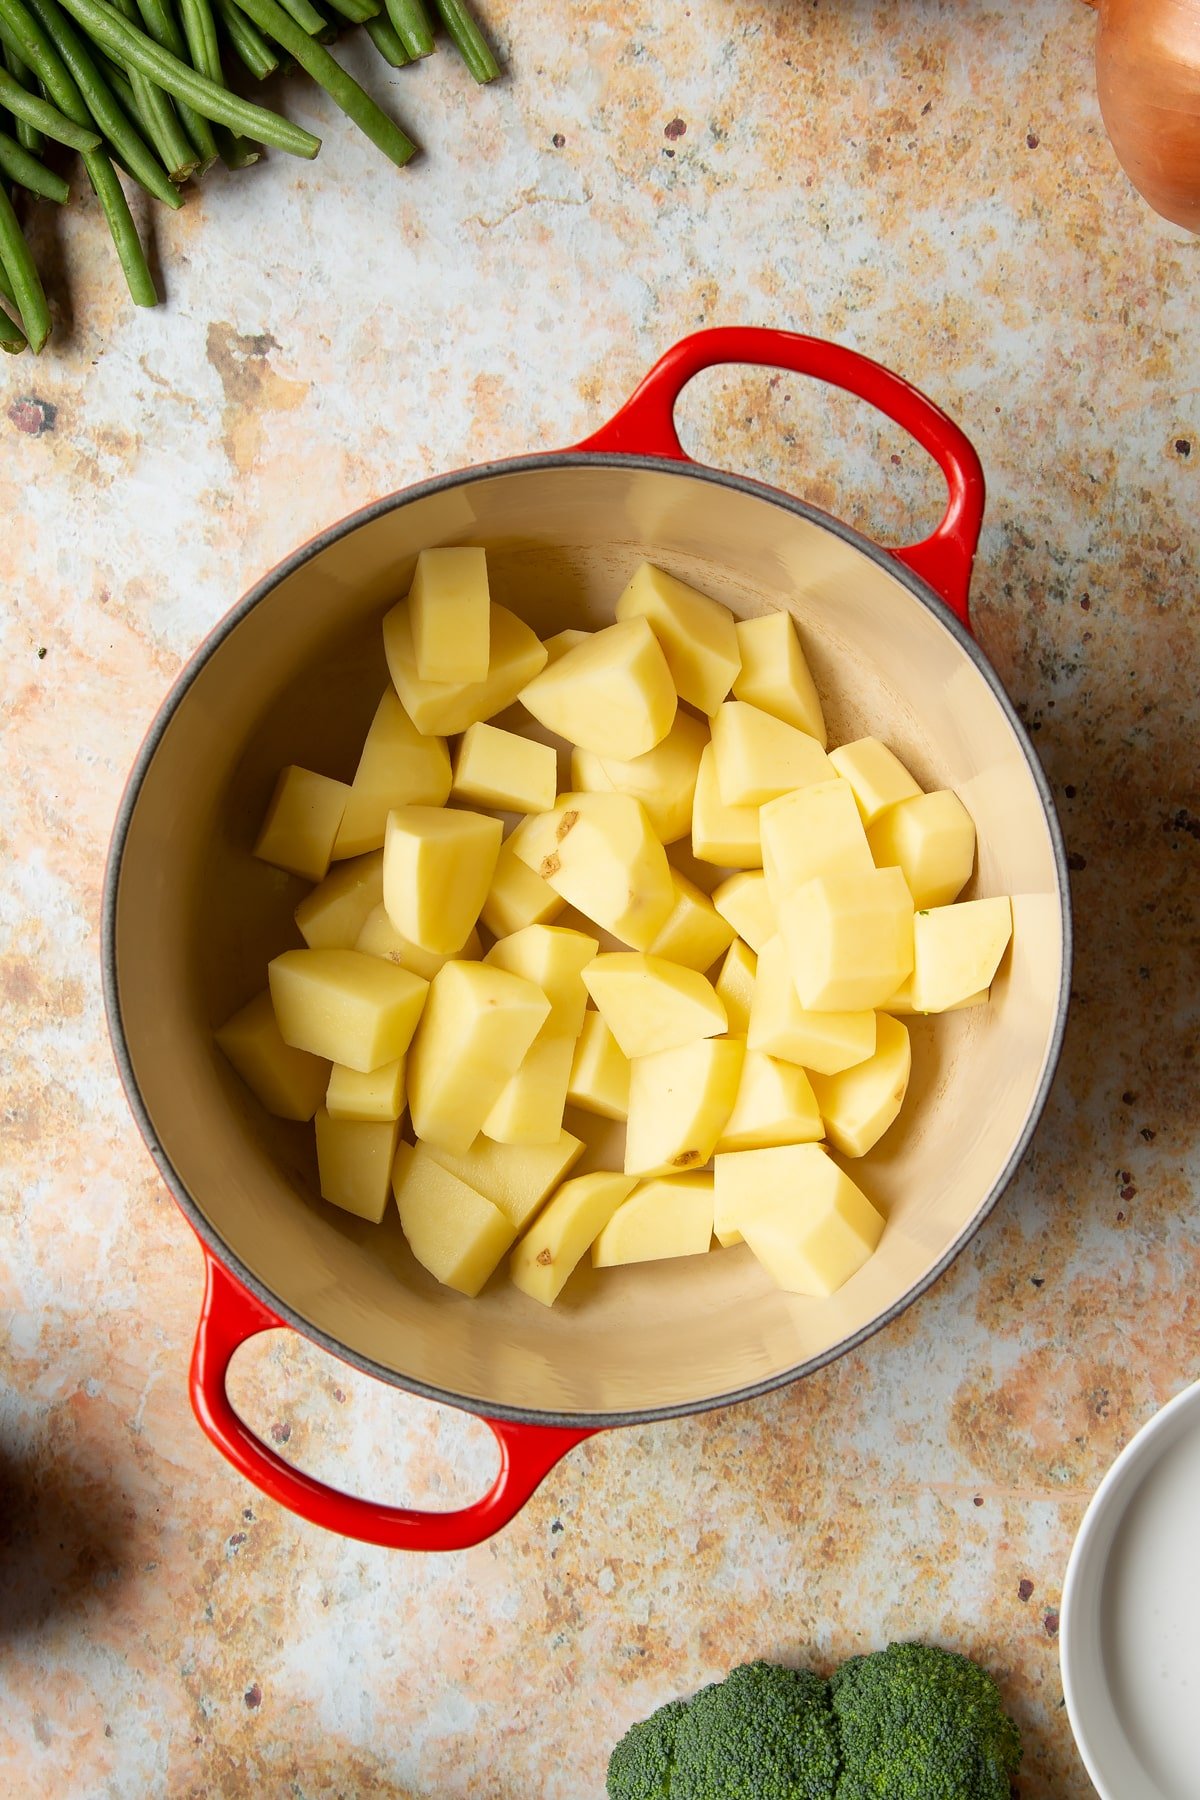 Peeled and chopped potatoes in a saucepan. Ingredients to make vegetarian yellow curry surround the pan.